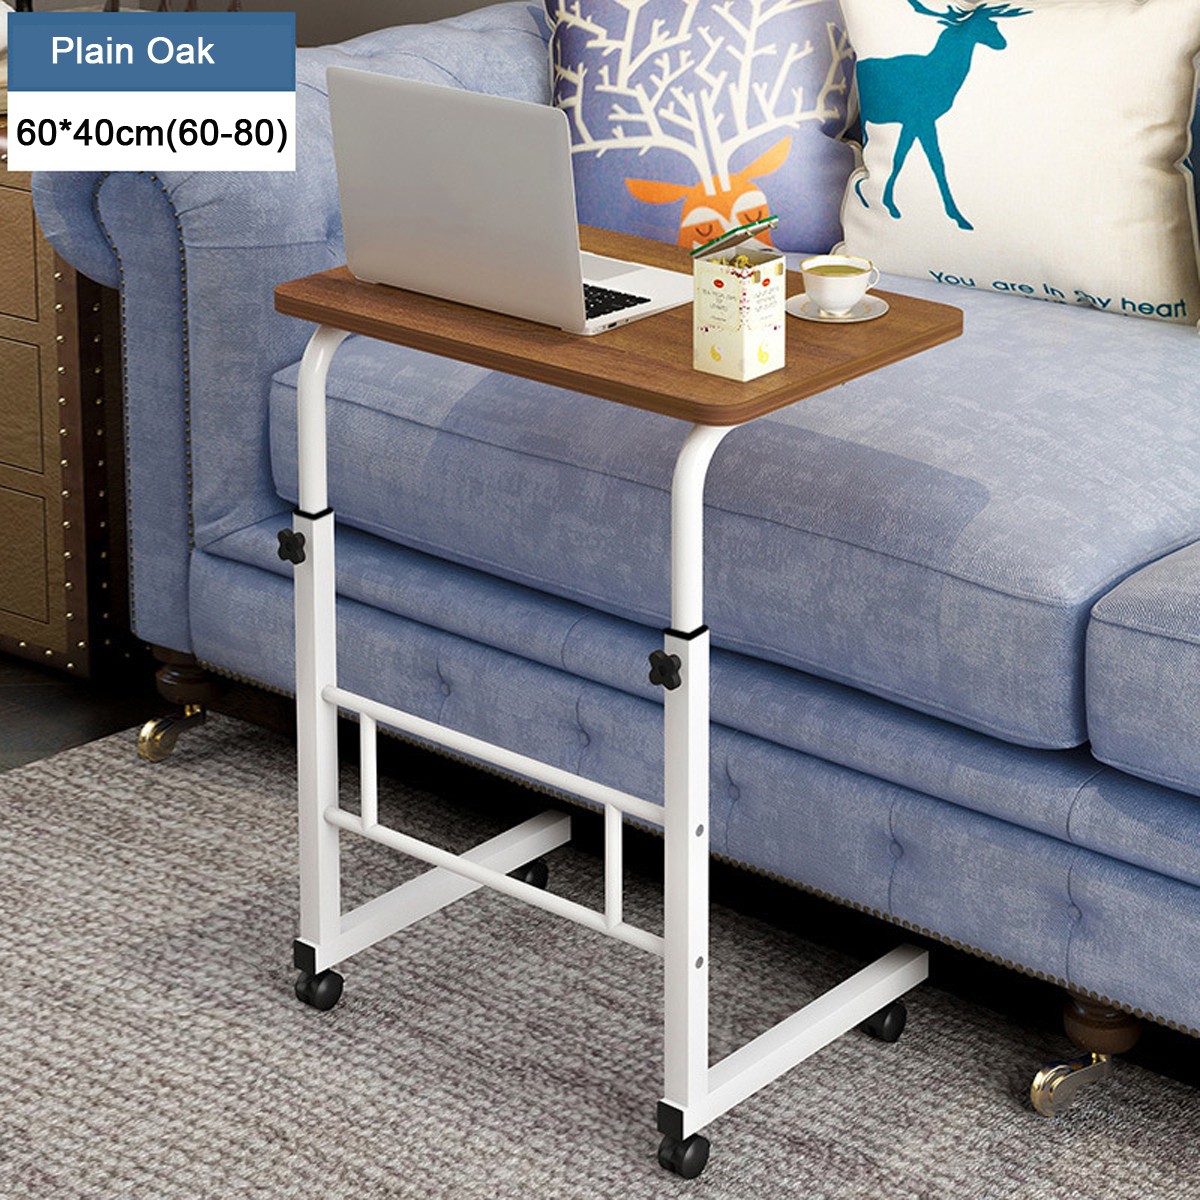 Stoneway over bed table c side rolling table with lockable